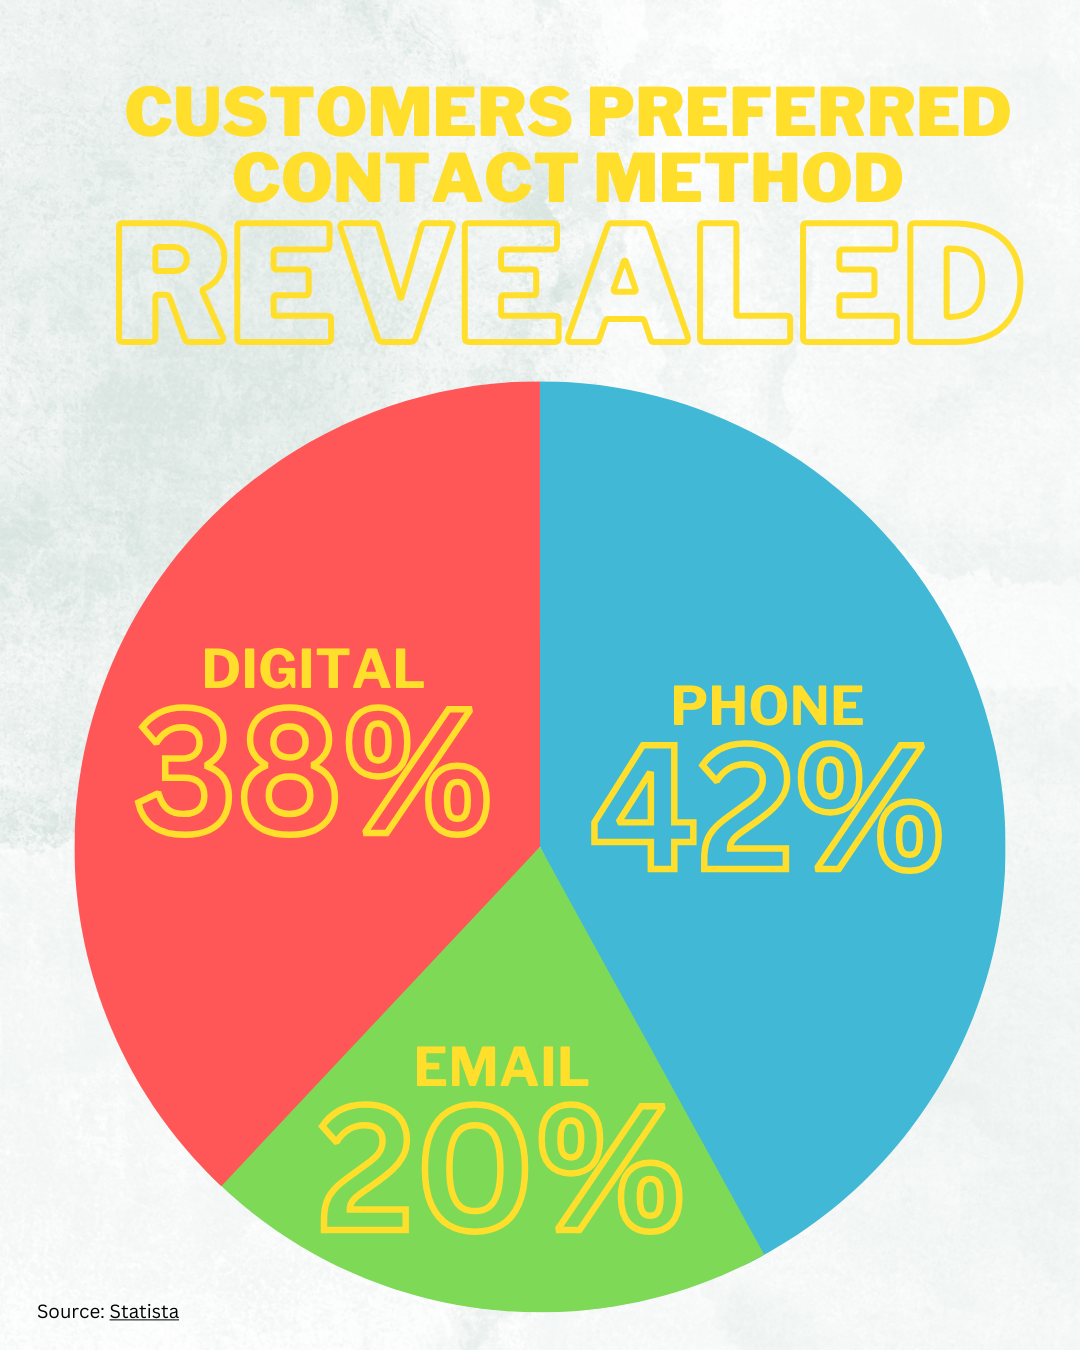 Pie chart showing customers' preferred contact method